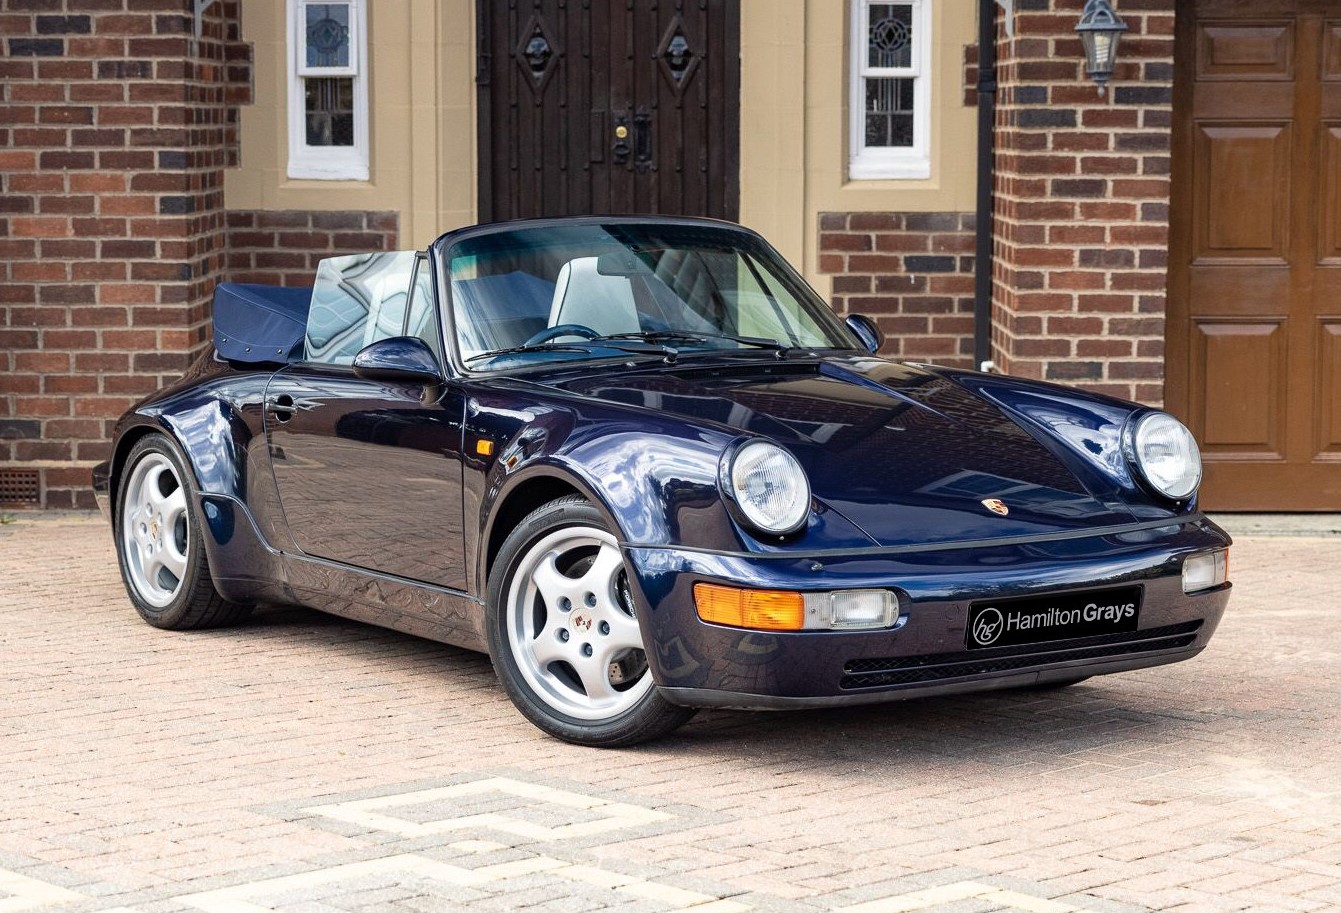 1992 (J)  Porsche 911 [964] Carrera 2 Tiptronic Cabriolet. Genuine ‘Turbo Look’ UK Wide-Body.. In Midnight Blue with Full Linen Hide.. Only 55k. Very Rare Car, Superb Example. £99,950